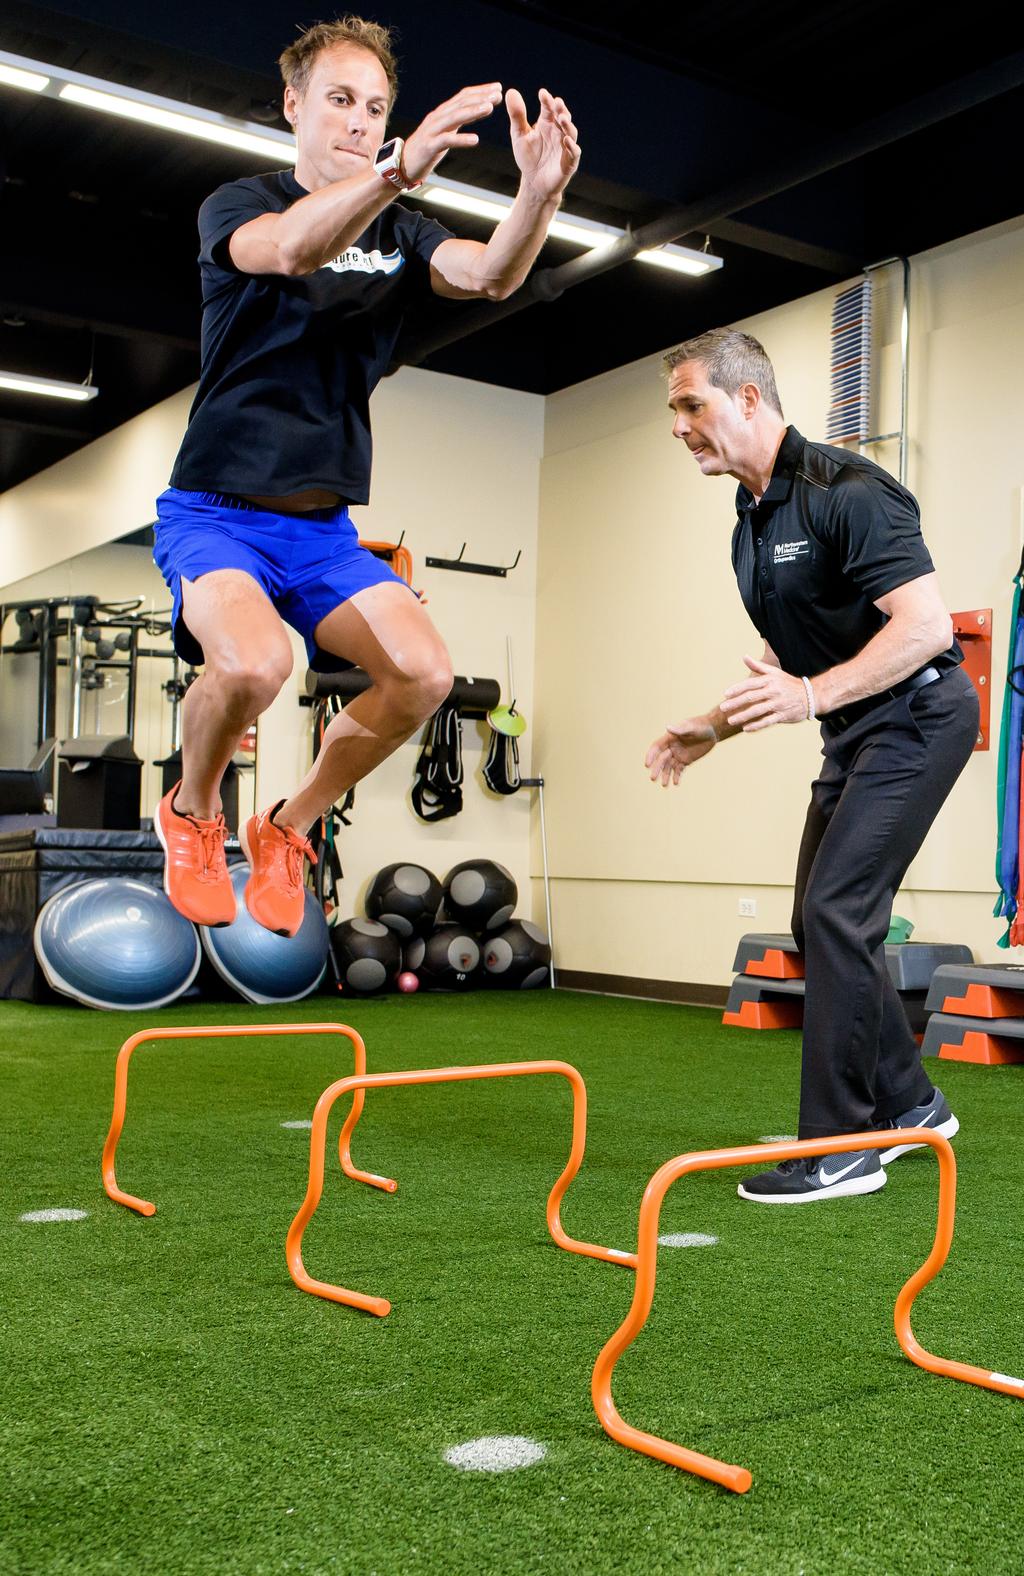 Golf Fitness team training Team training allows five or more athletes to train together under the